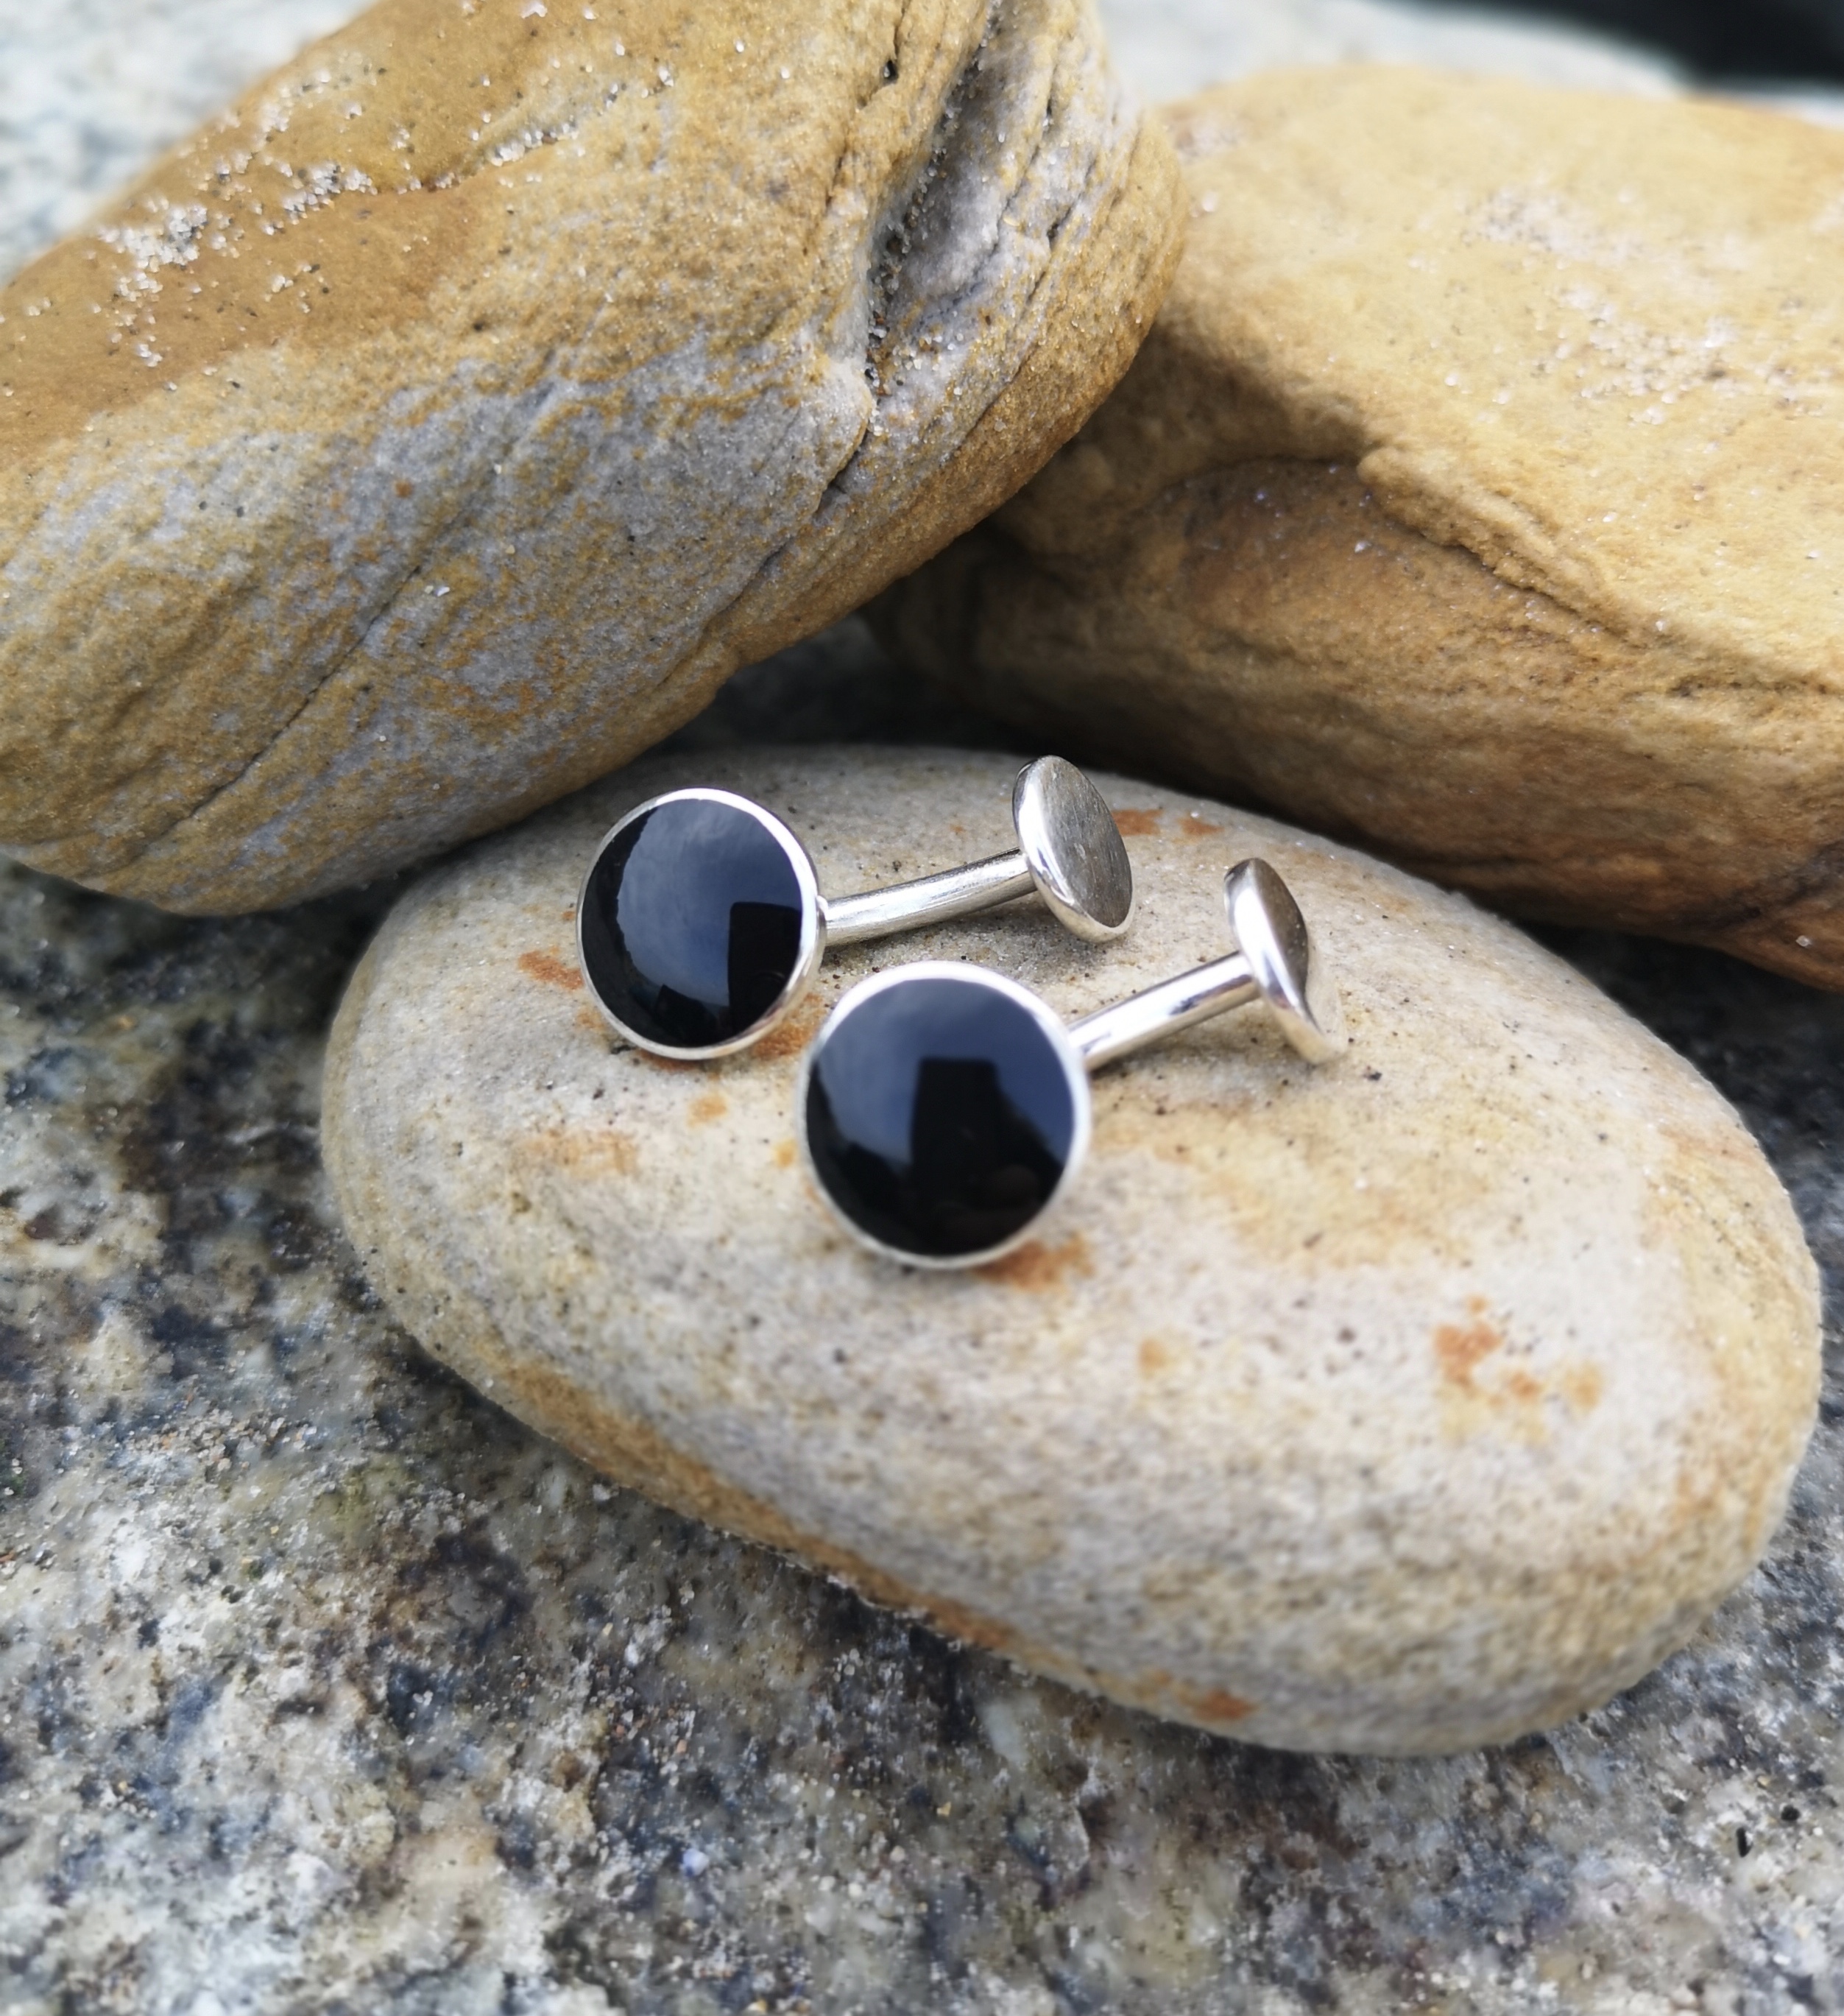 Single-ended Whitby Jet Round cufflinks